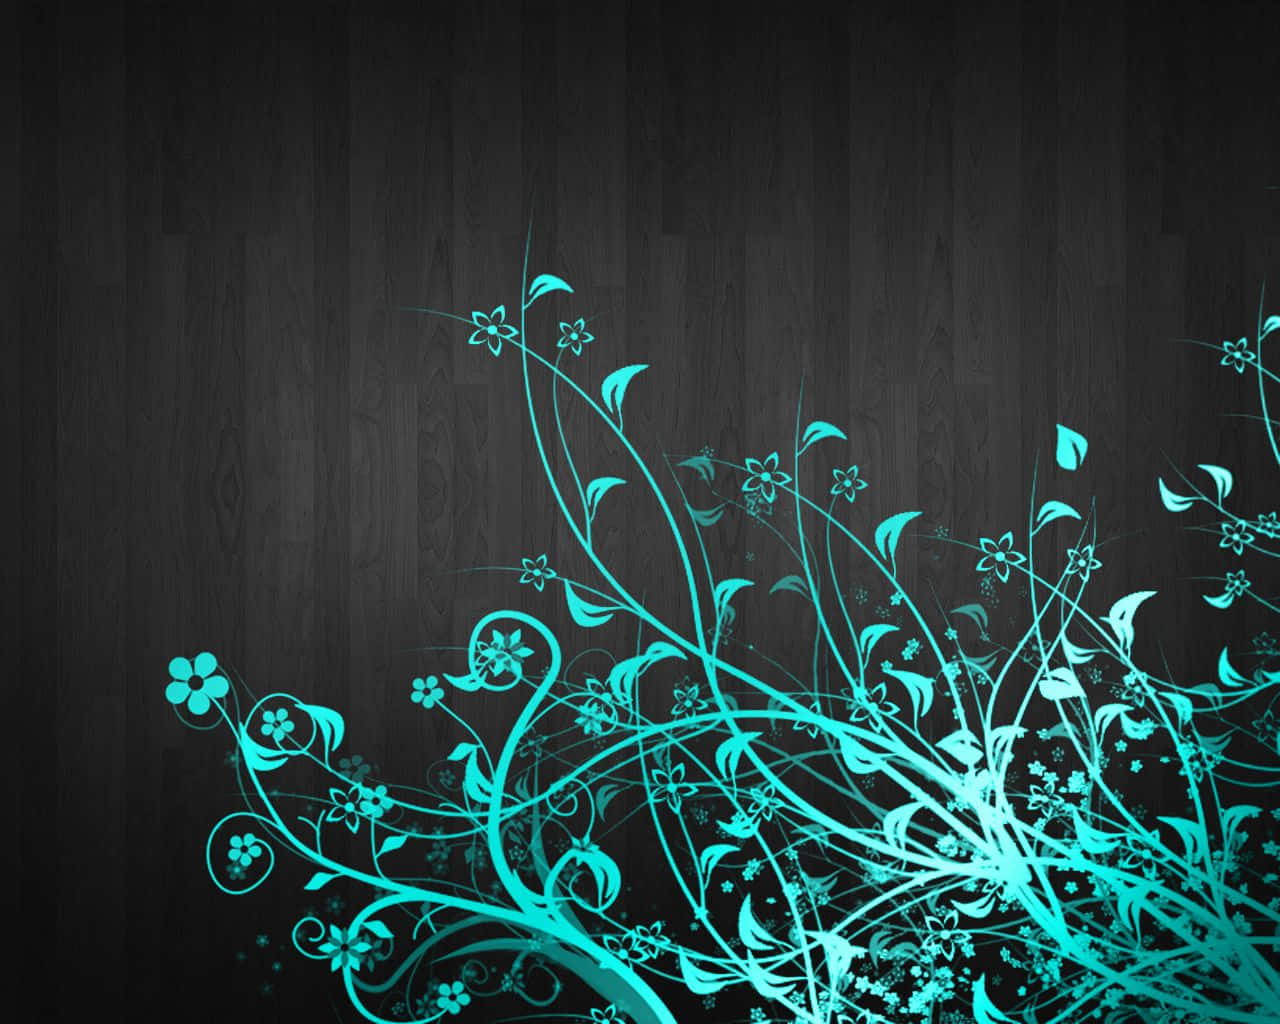 turquoise and black floral background